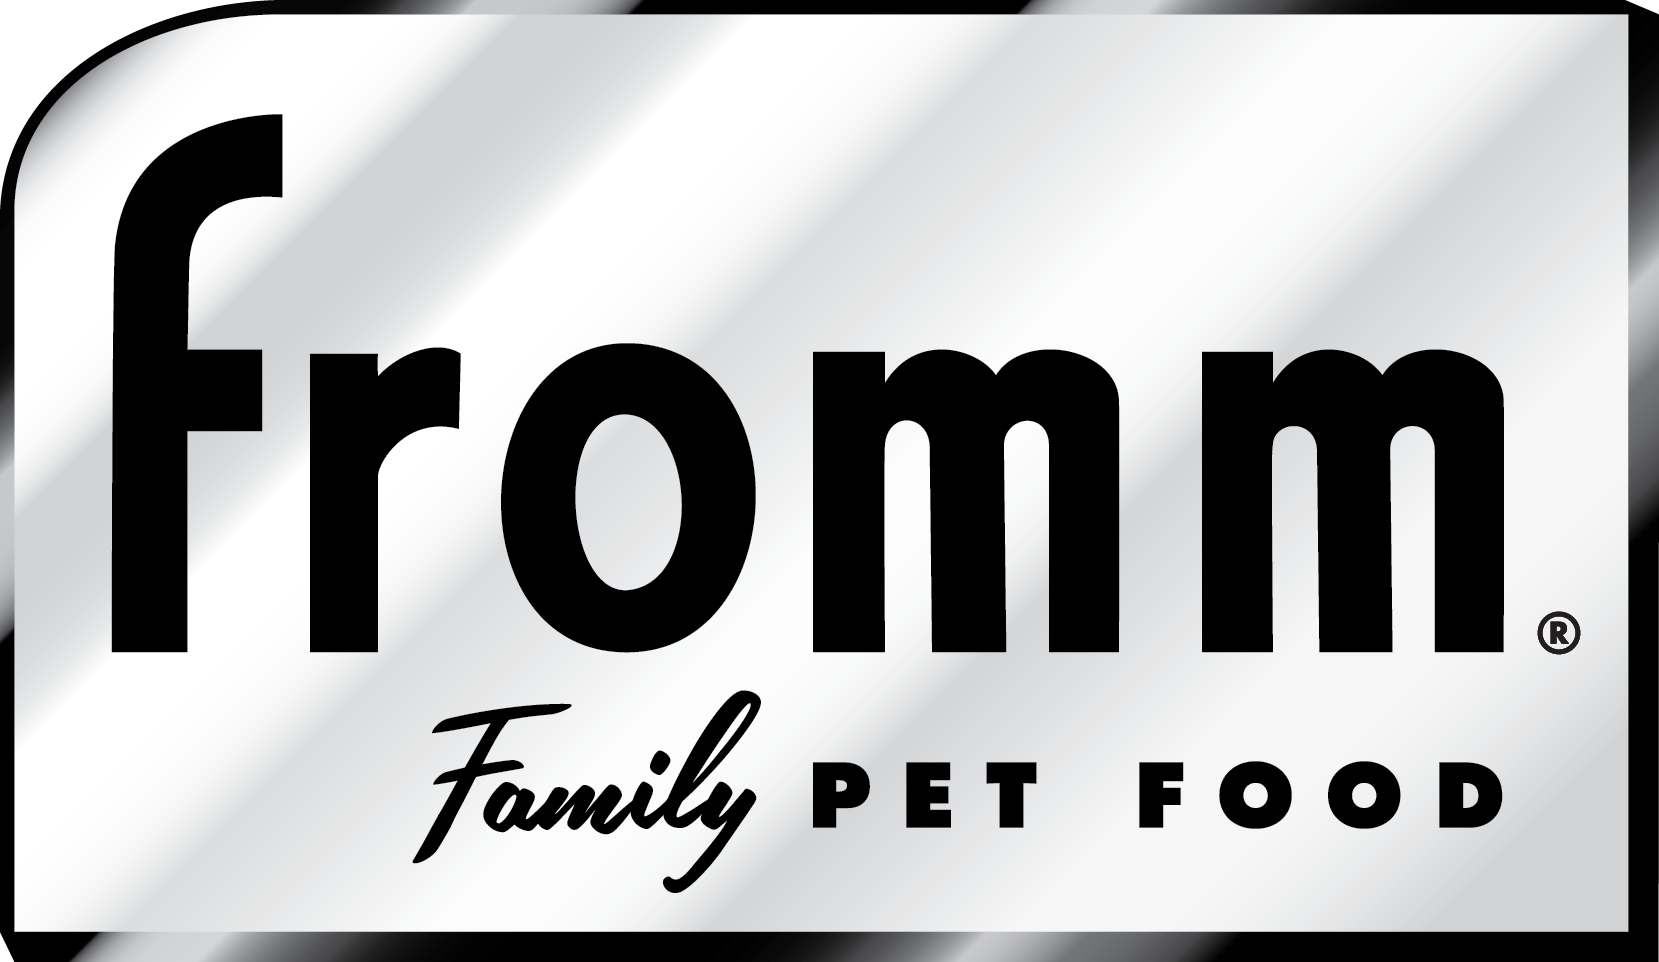 fromm-brand-logo-transparent.png